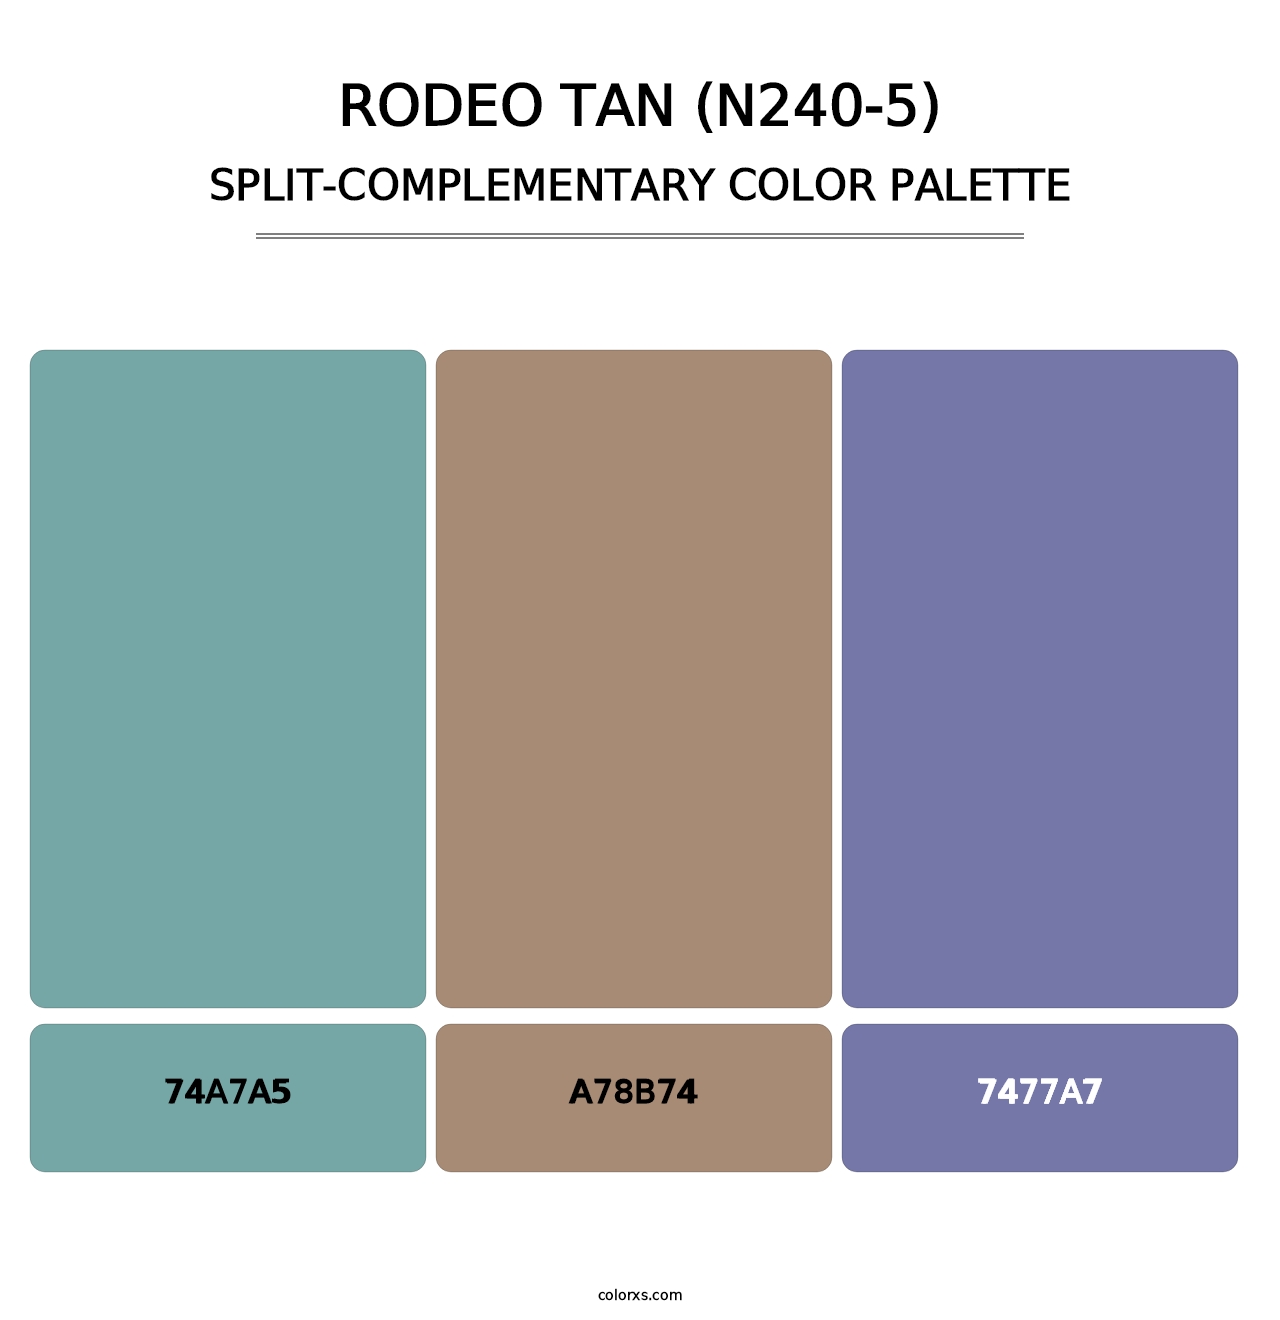 Rodeo Tan (N240-5) - Split-Complementary Color Palette